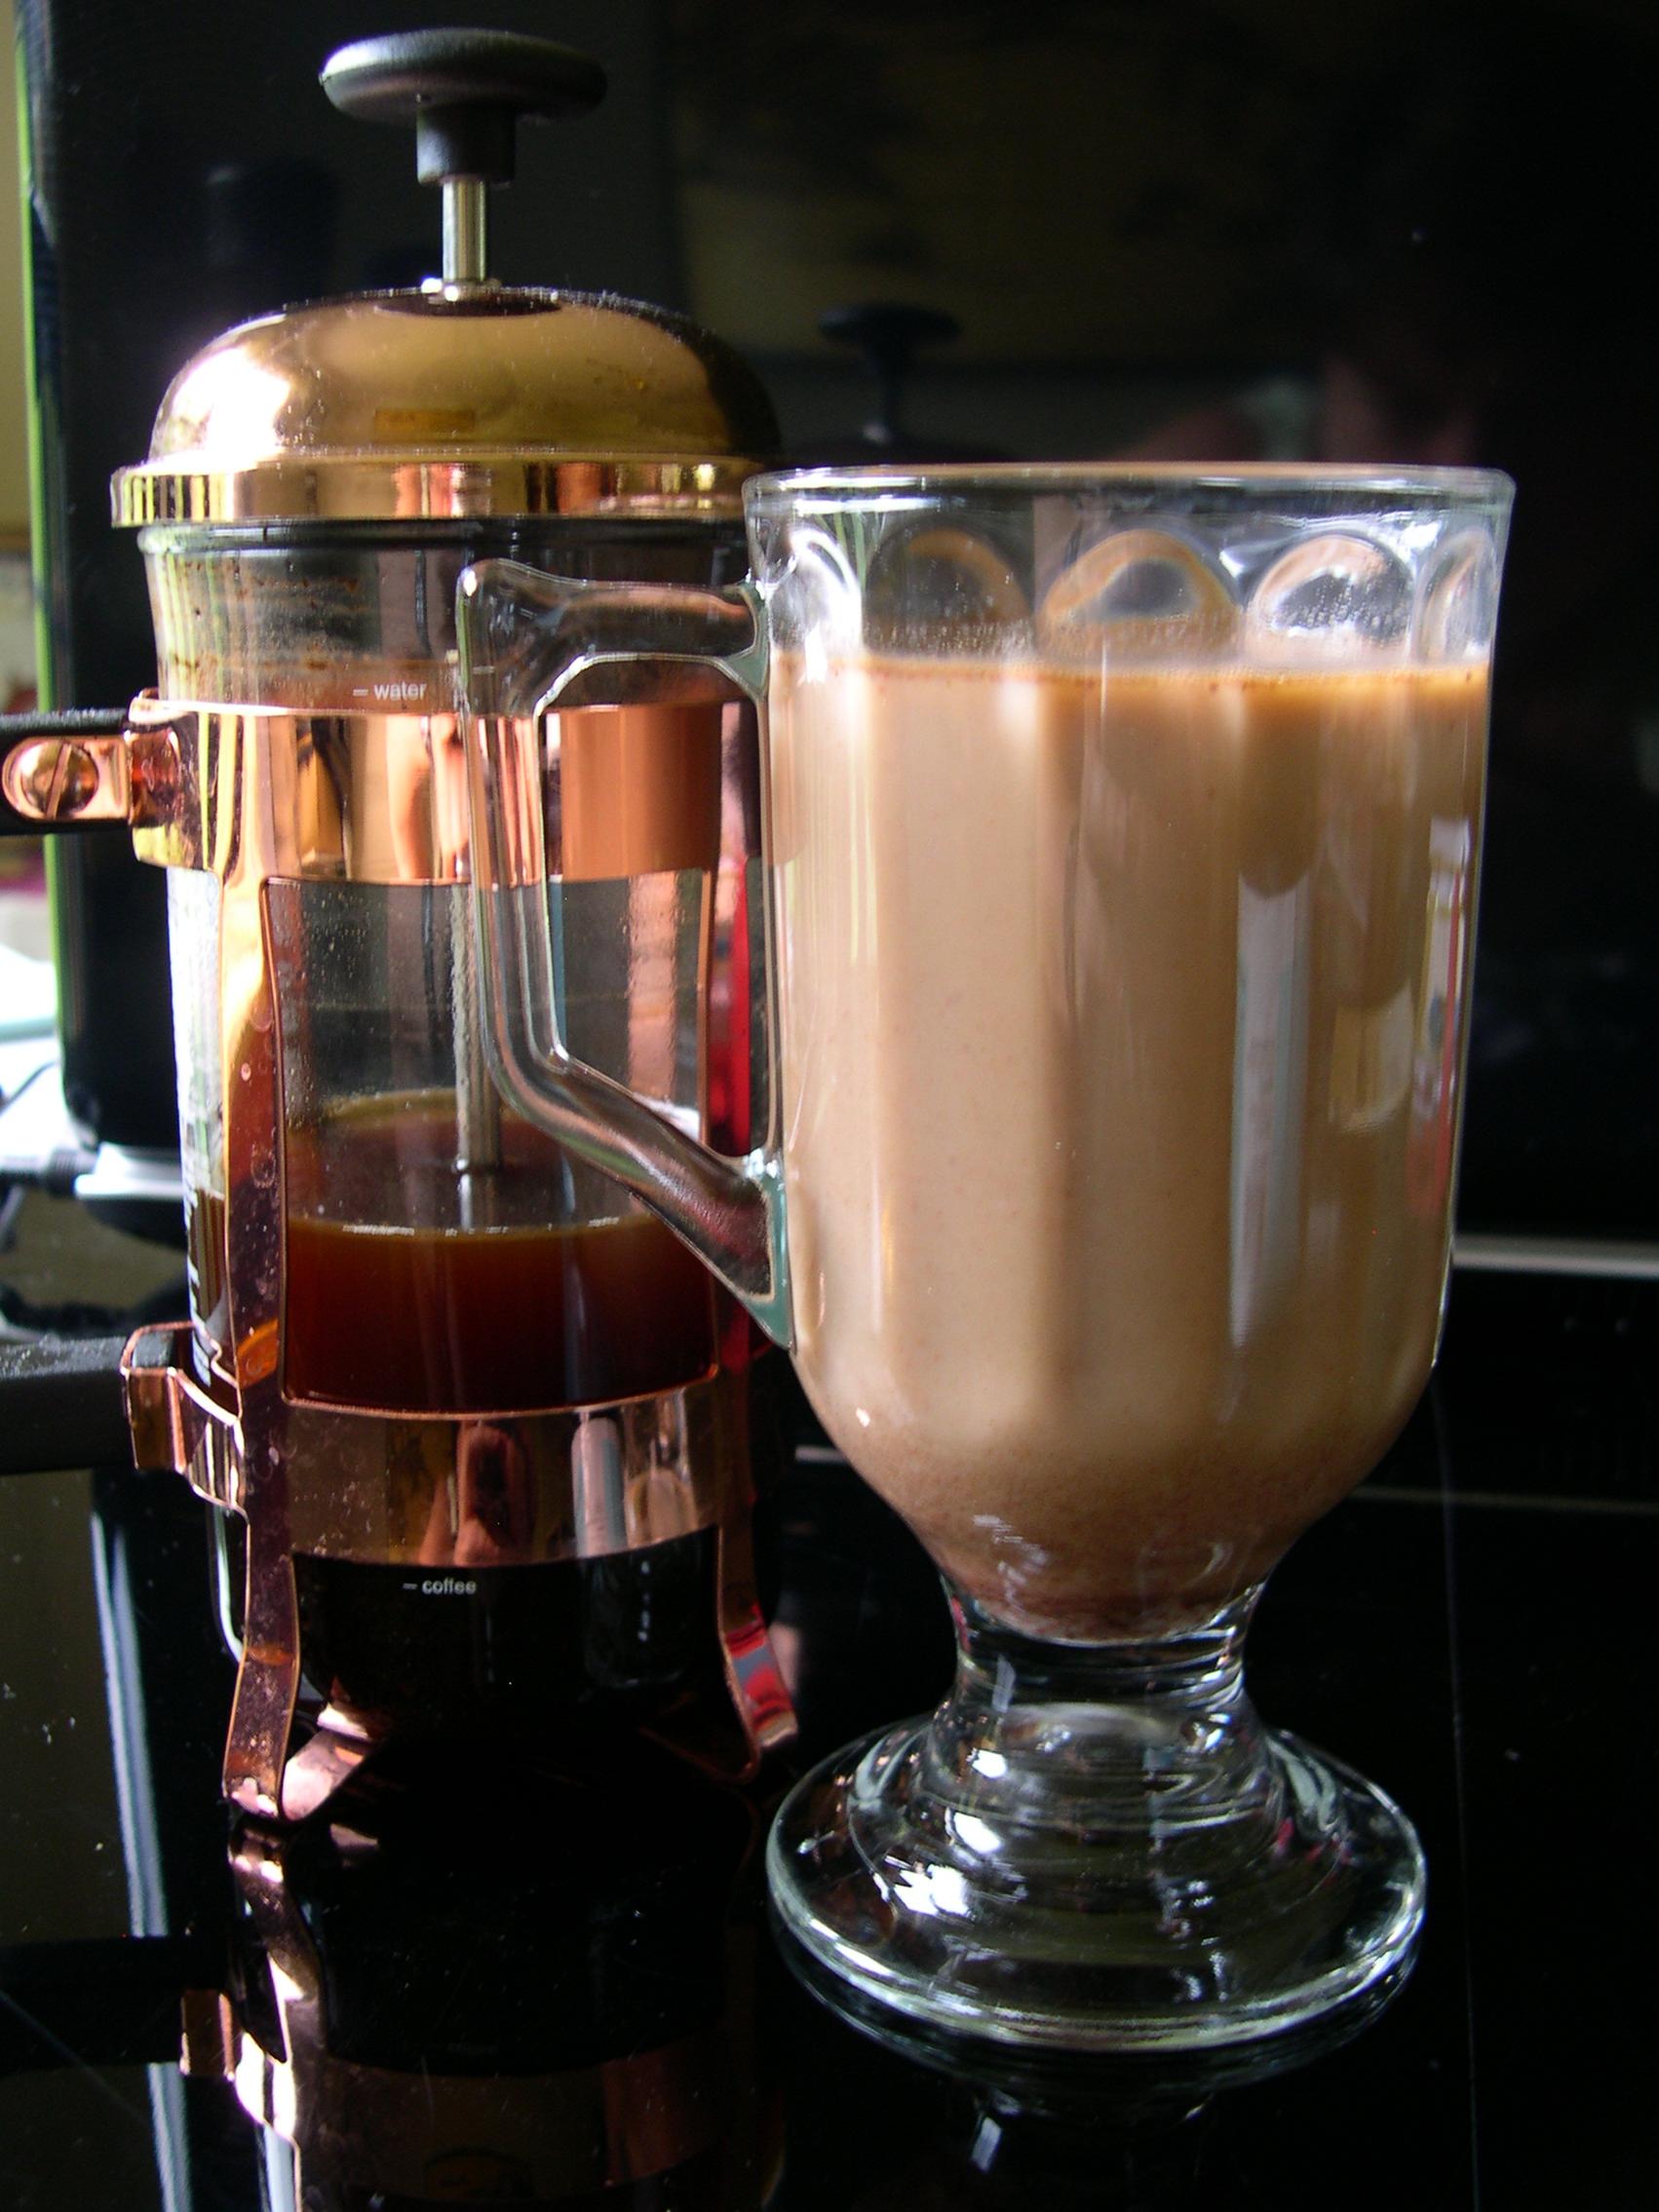  Brew that espresso like a boss and get ready for some sweet Snickers action in your latte!